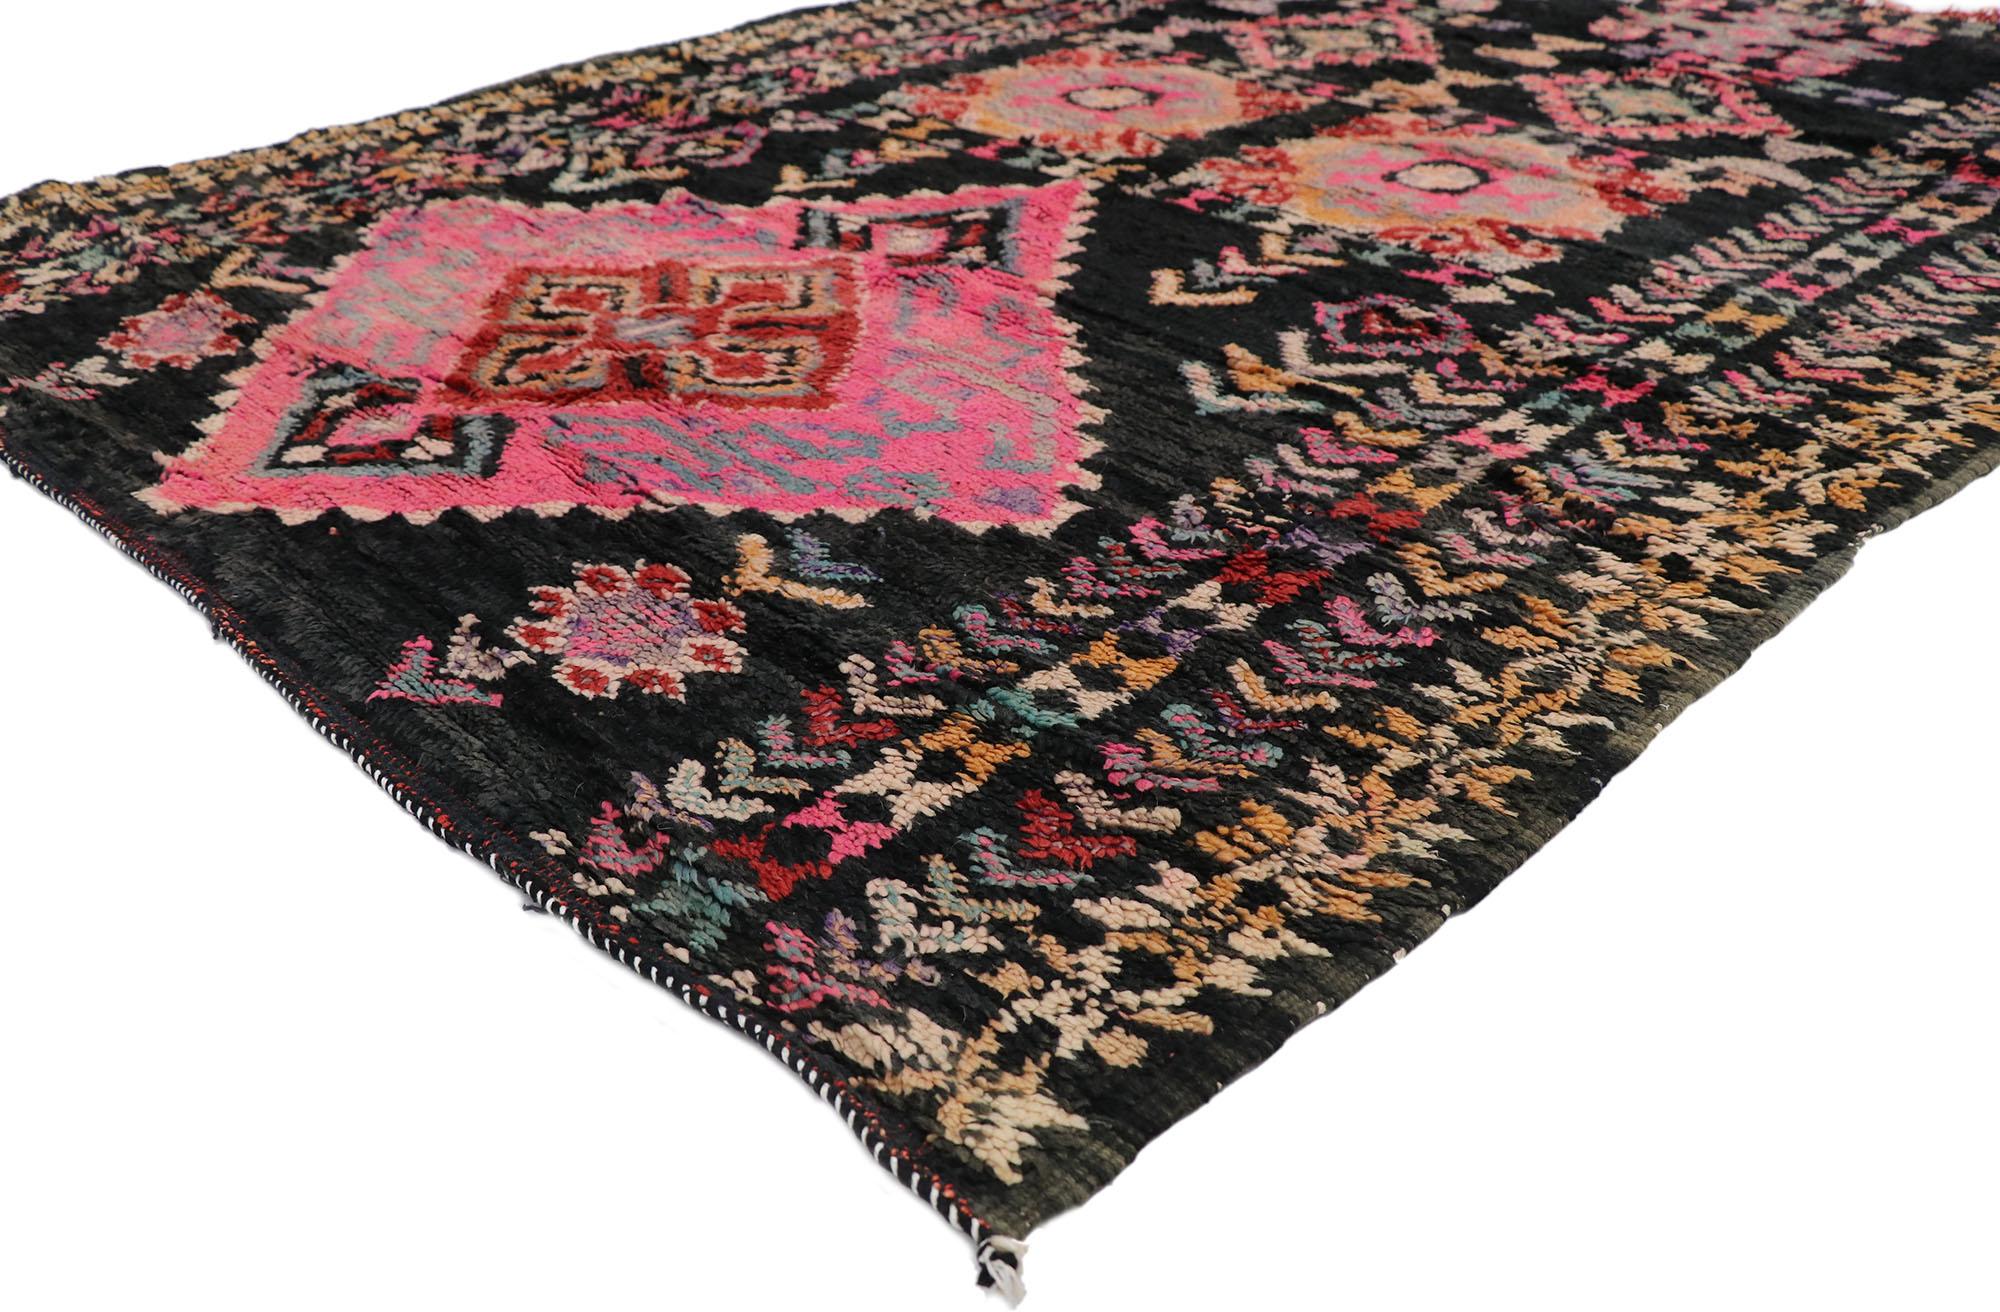 21259 Vintage Moroccan rug, 05'08 x 07'06.
Showcasing a bold tribal design, incredible detail and texture, this hand knotted wool vintage Moroccan rug is a captivating vision of woven beauty. The eye-catching geometric pattern and vibrant colors